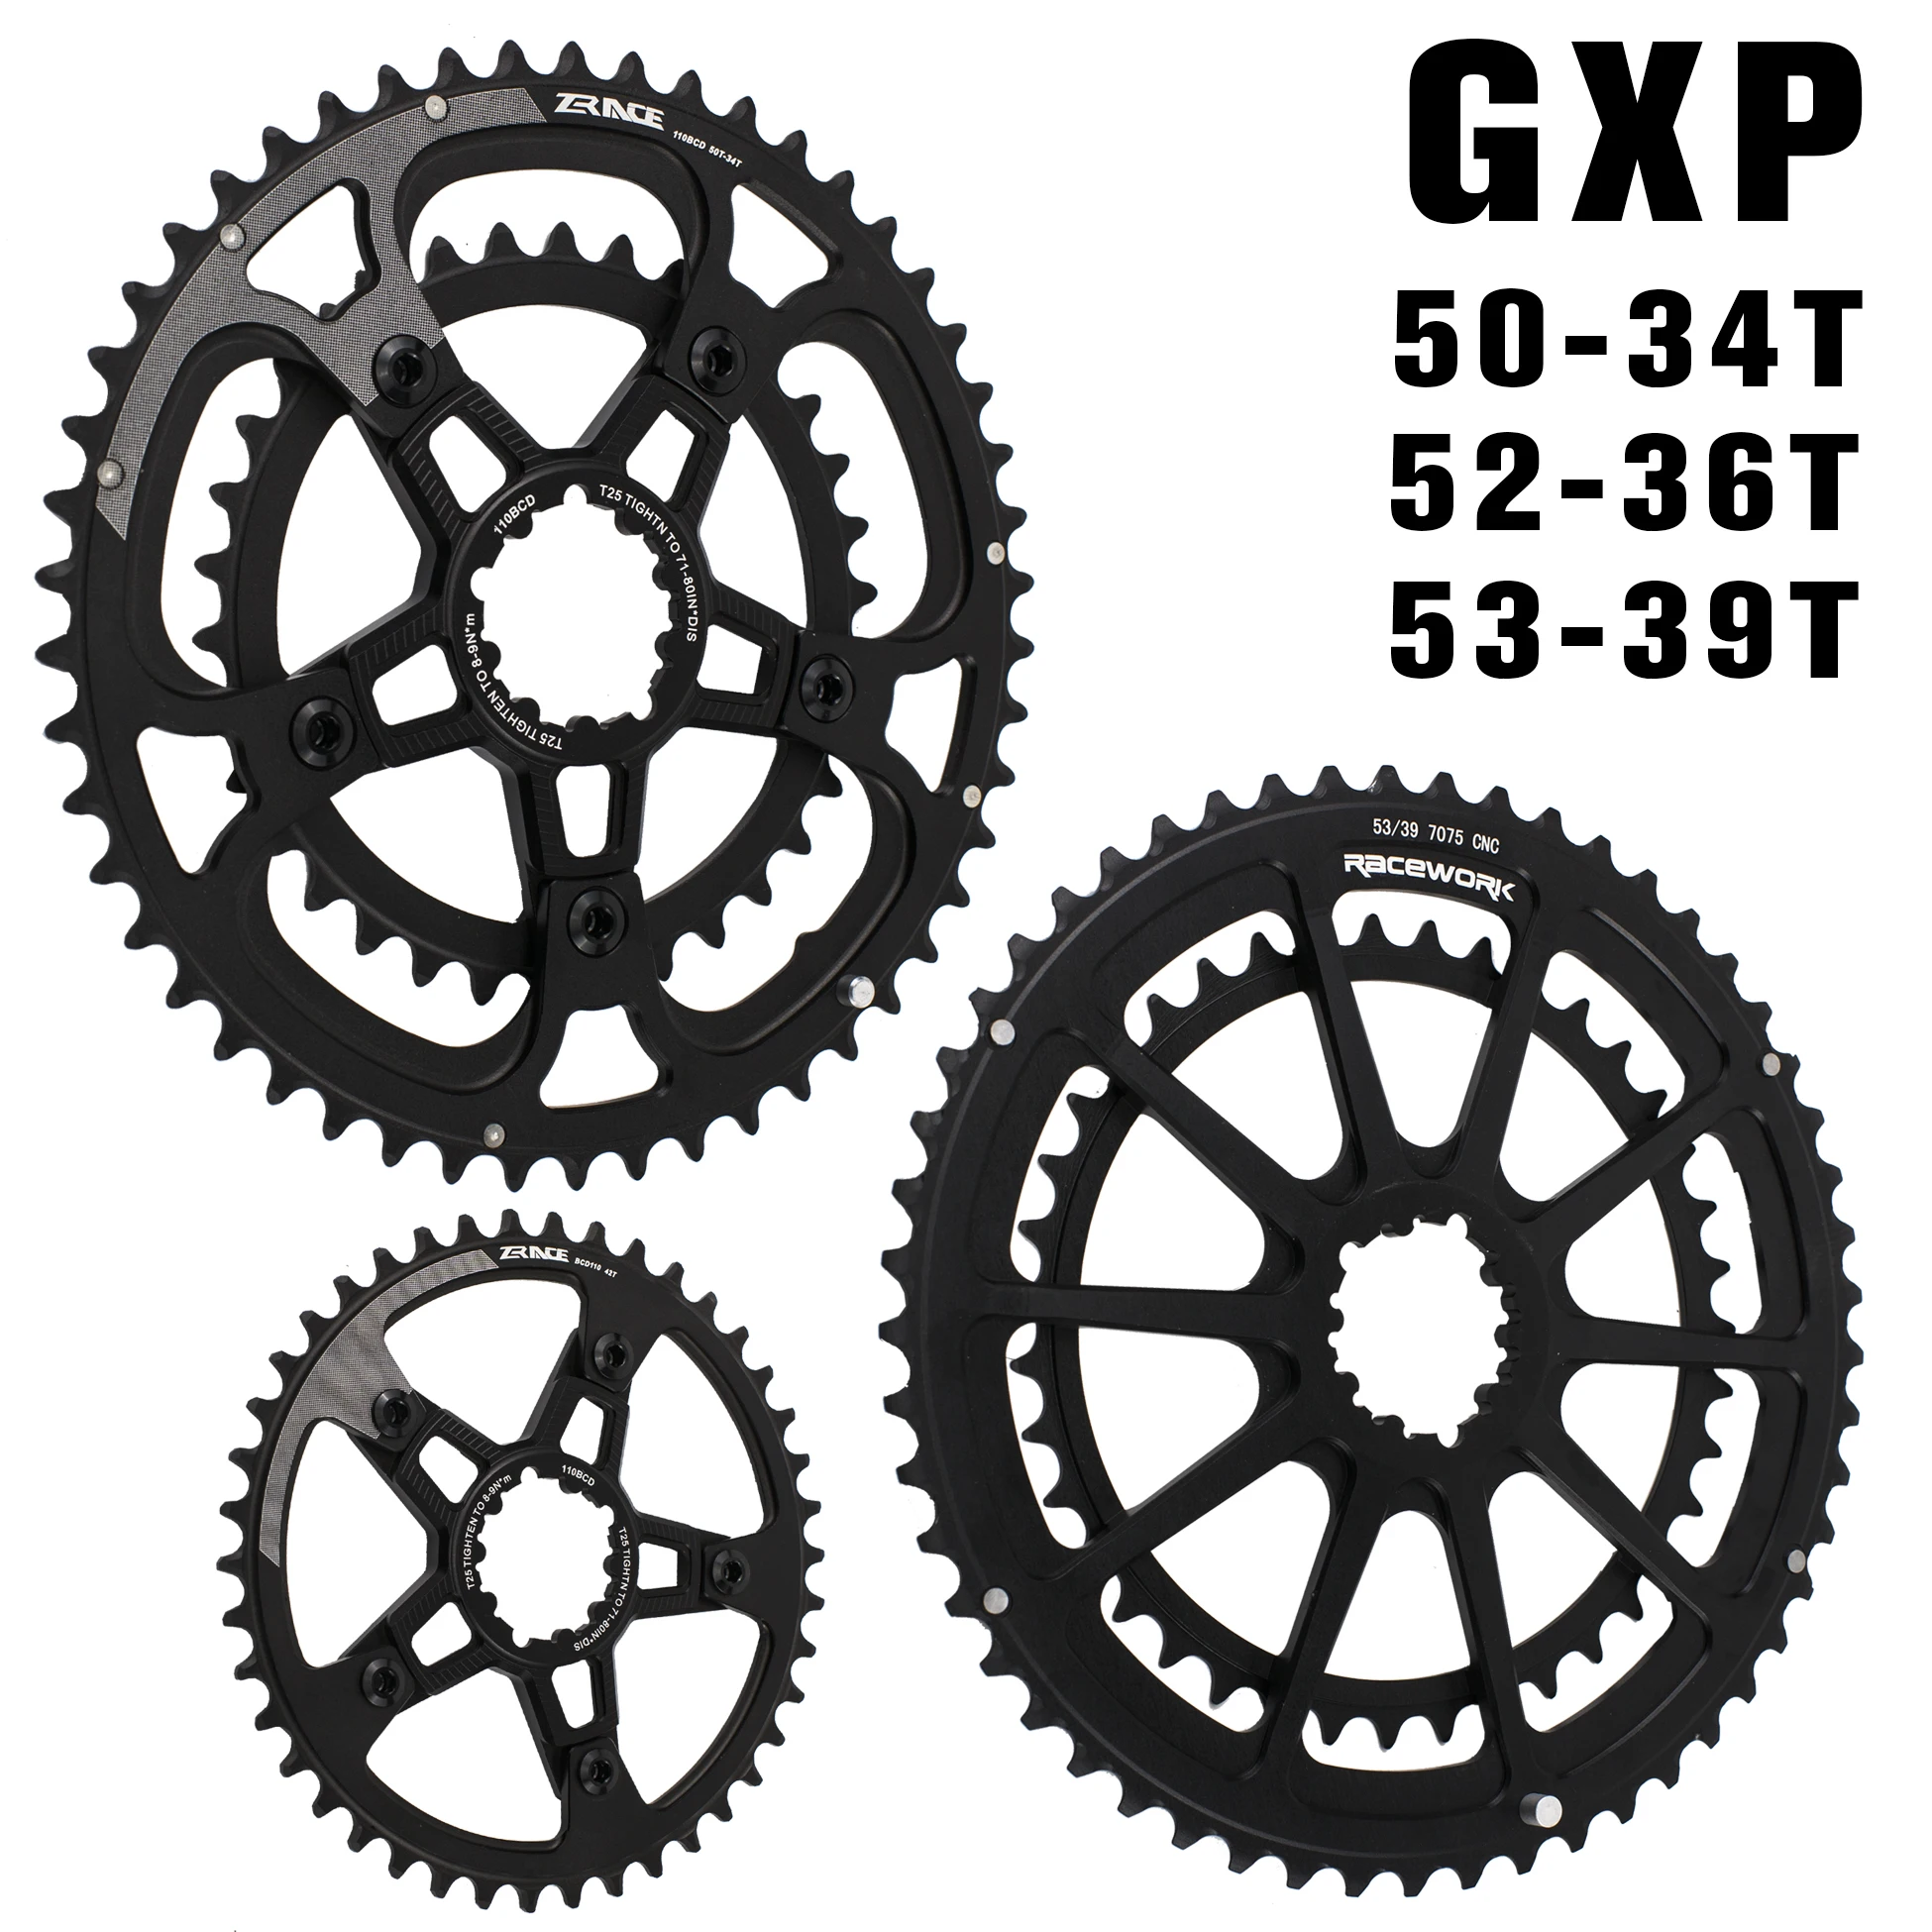 

RACEWORK Bicycle Road Chainwheel Chainring 110 BCD 50-34T 52-36T 53-39T 38T 40T 42T 44T for GXP Folding Bike Chain Rings New